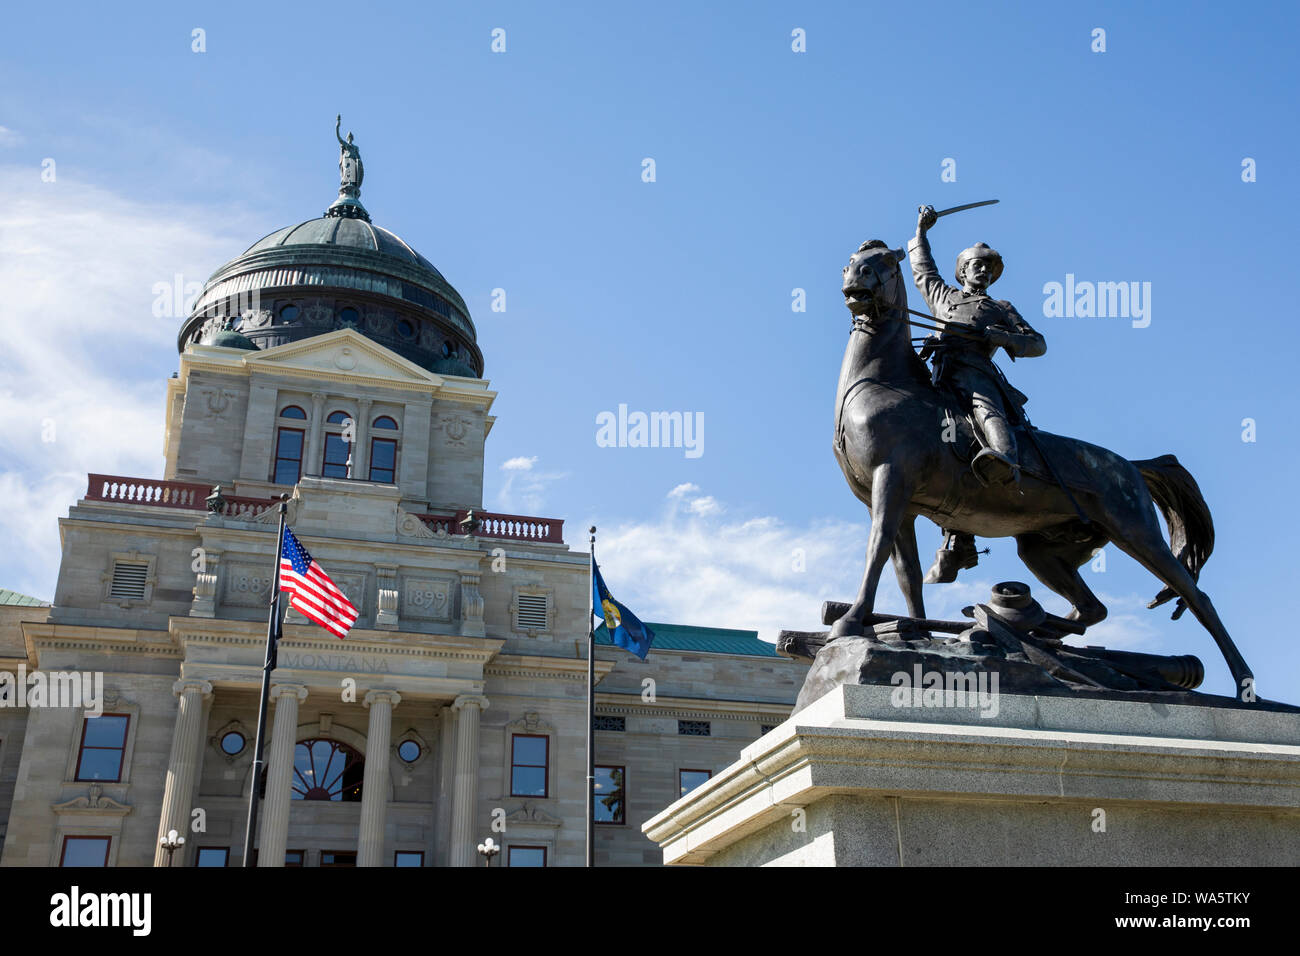 FRANCIS MAGEREN STATUE STATE CAPITOL BUILDING HELENA MONTANA USA Stockfoto